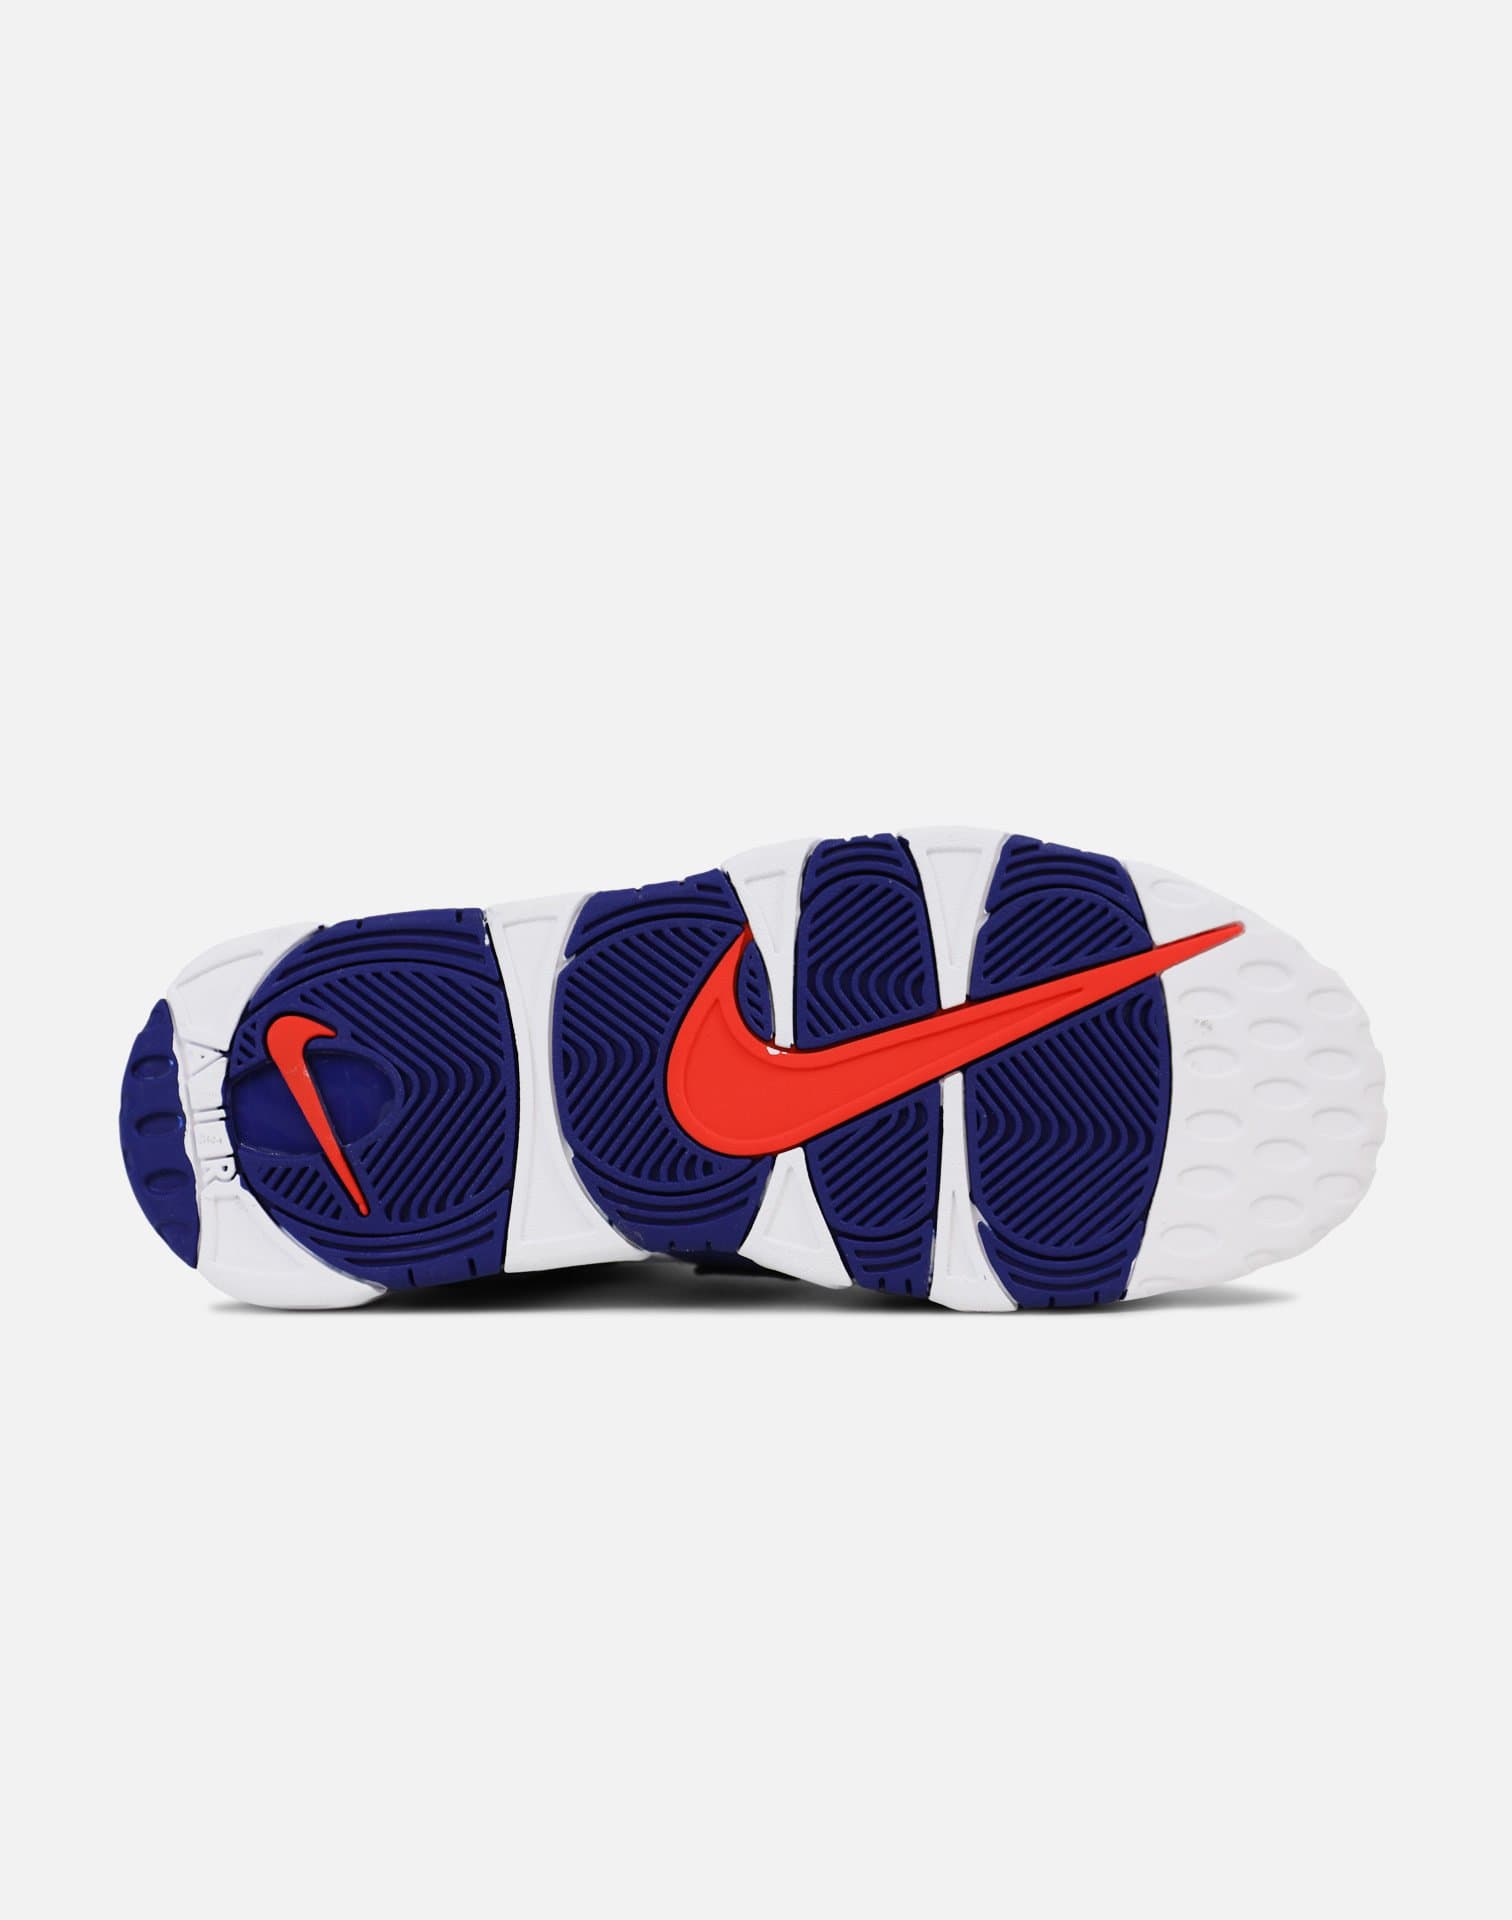 Nike Air More Uptempo 96 'Air With Authority' (White/Deep Royal Blue-Team Orange)